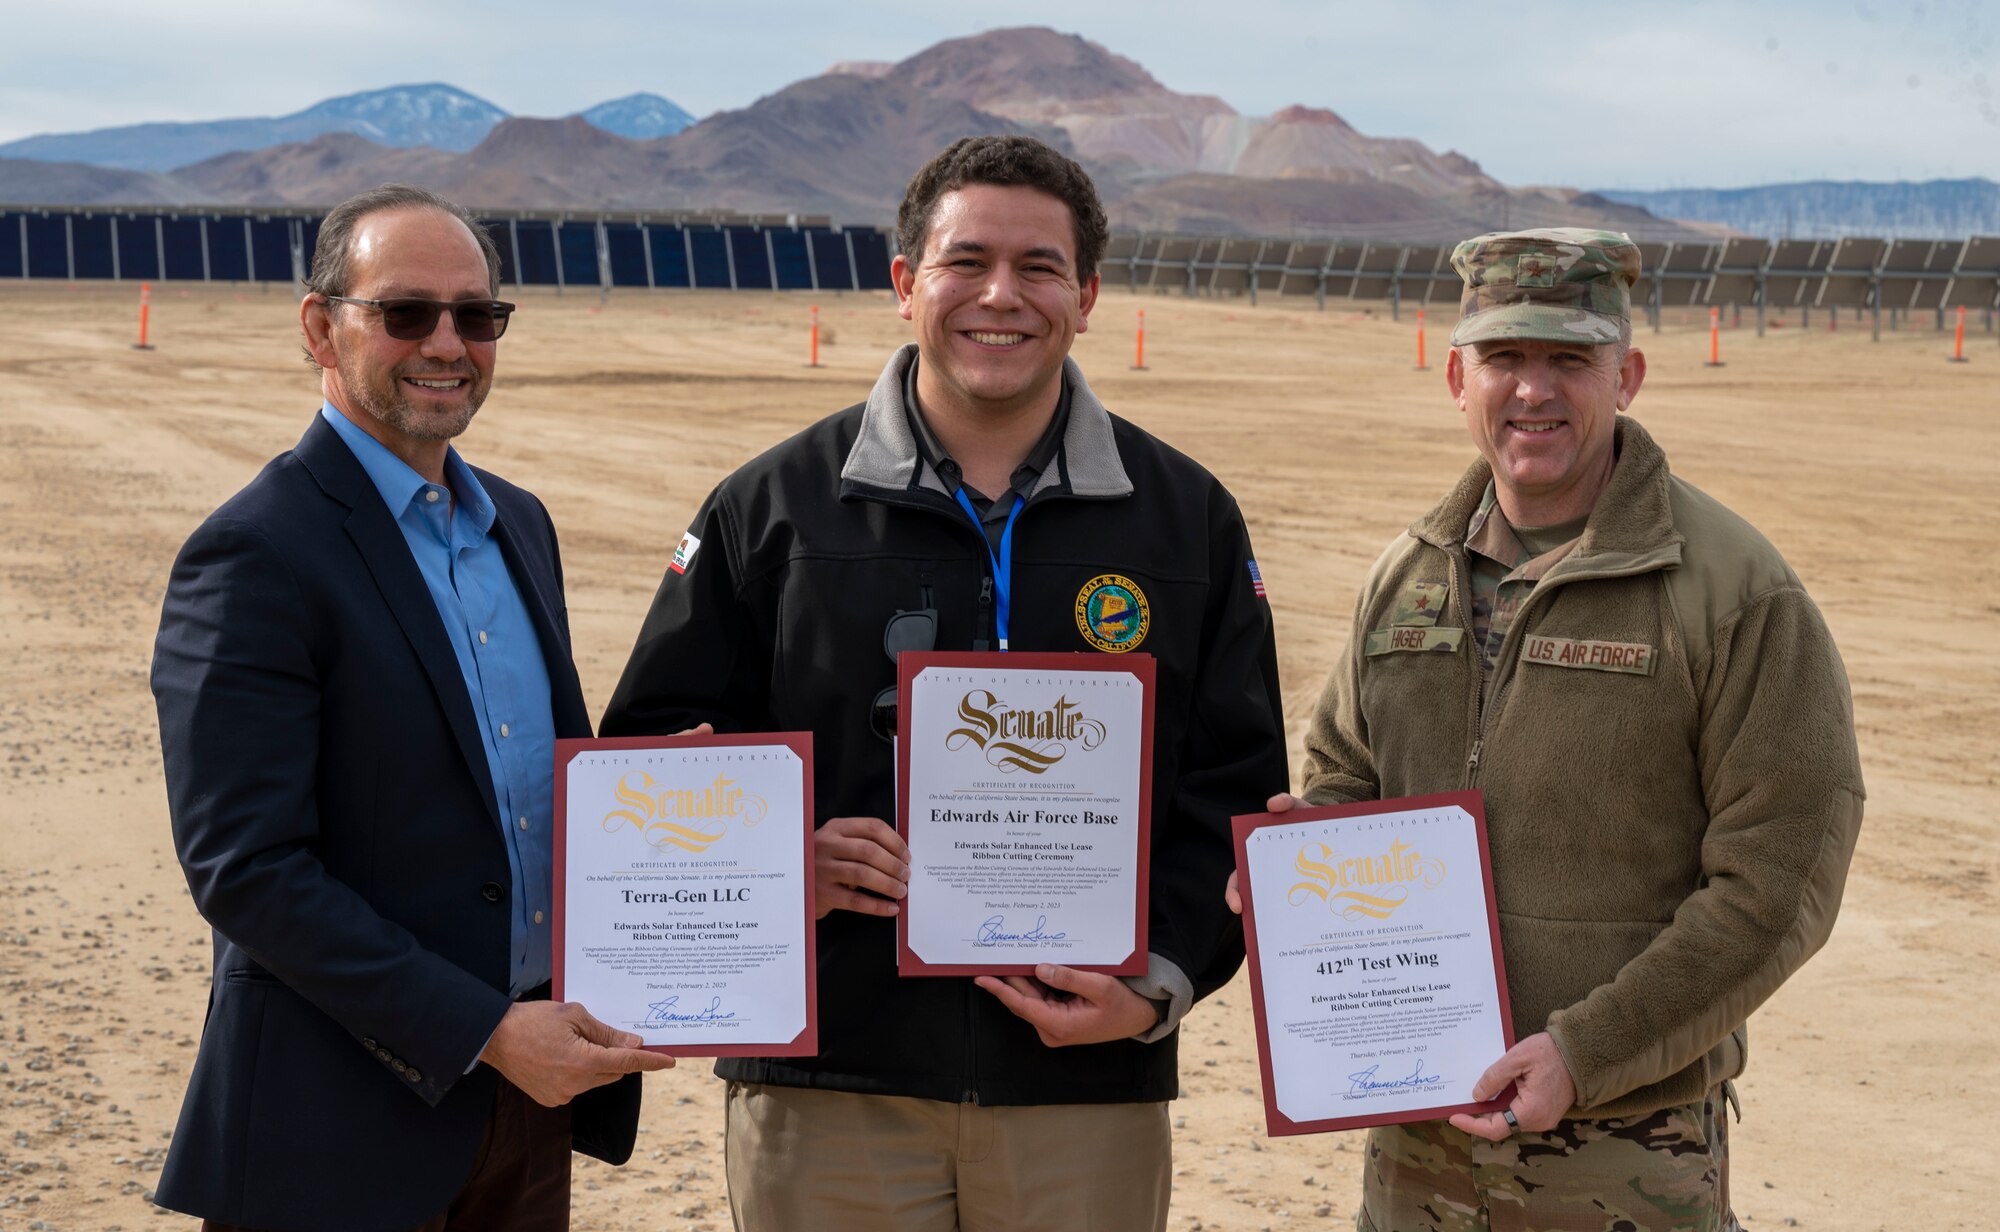 James R. Pagano, Chief Executive Officer, Terra-Gen LLC, and Brig. Gen. Matthew Higer, Commander, 412th Test Wing receive Certificates of Recognition from the California State Senate commemorating the largest private-public collaboration in Department of Defense history at Edwards Air Force Base, California, Feb. 2.